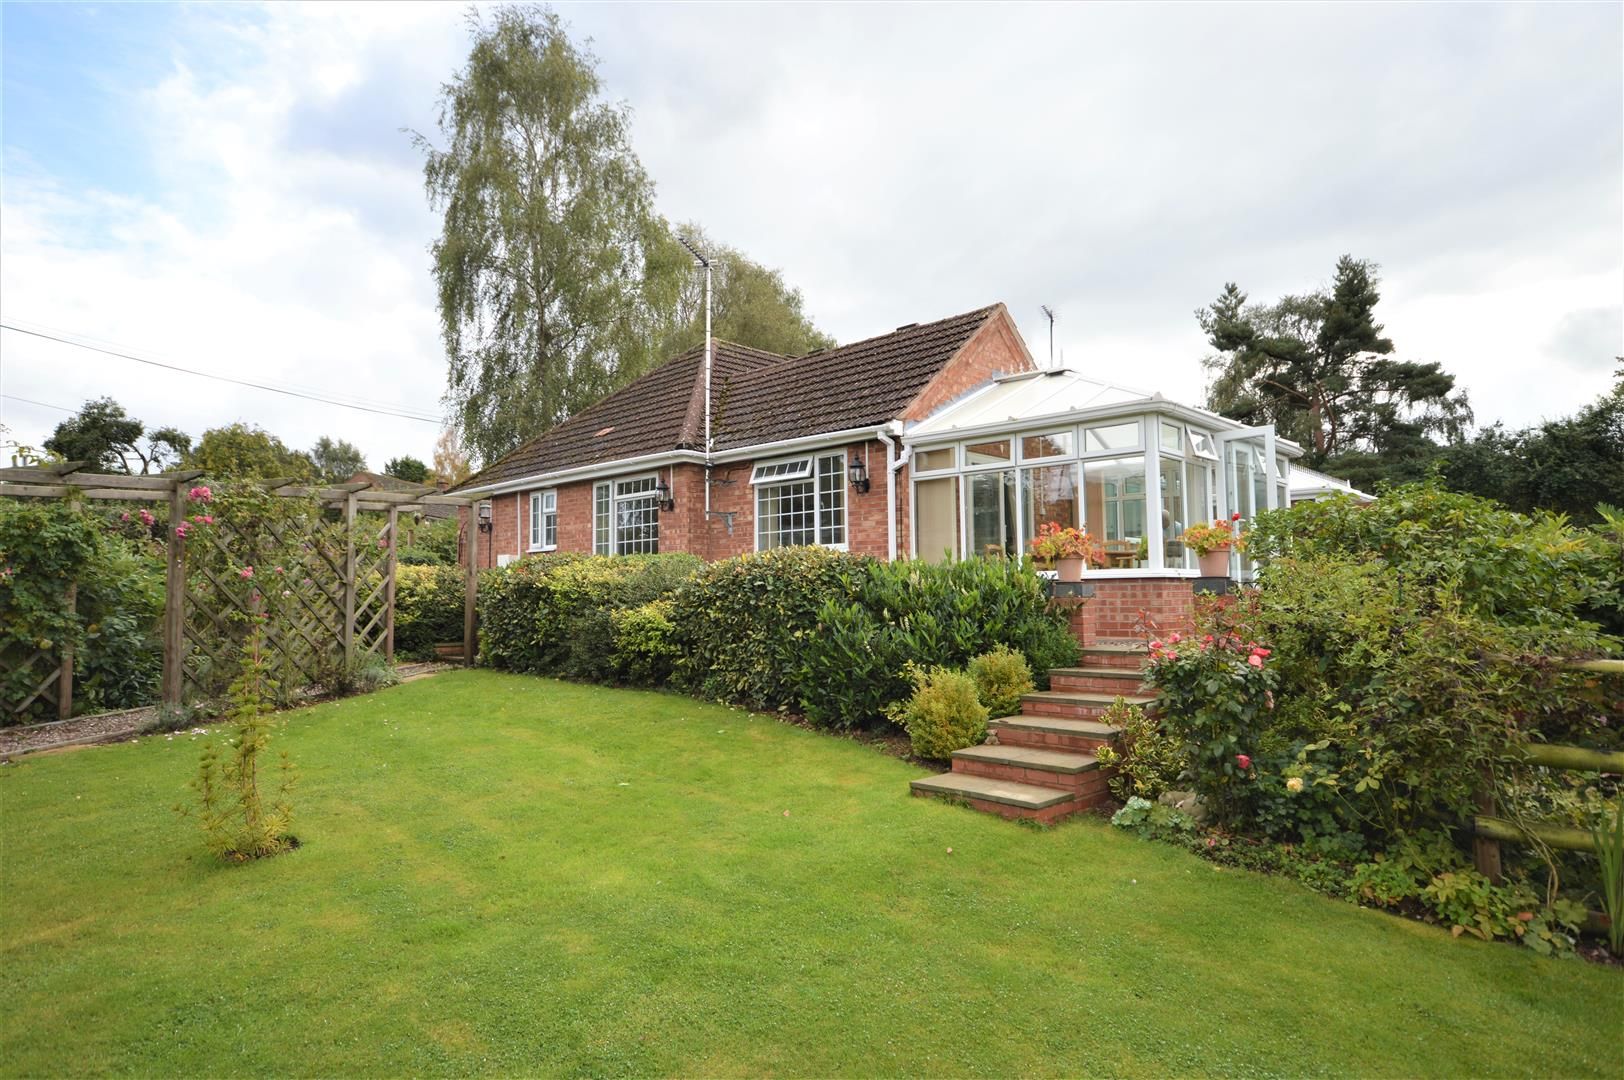 3 bed semi-detached bungalow for sale in Upper Hill - Property Image 1